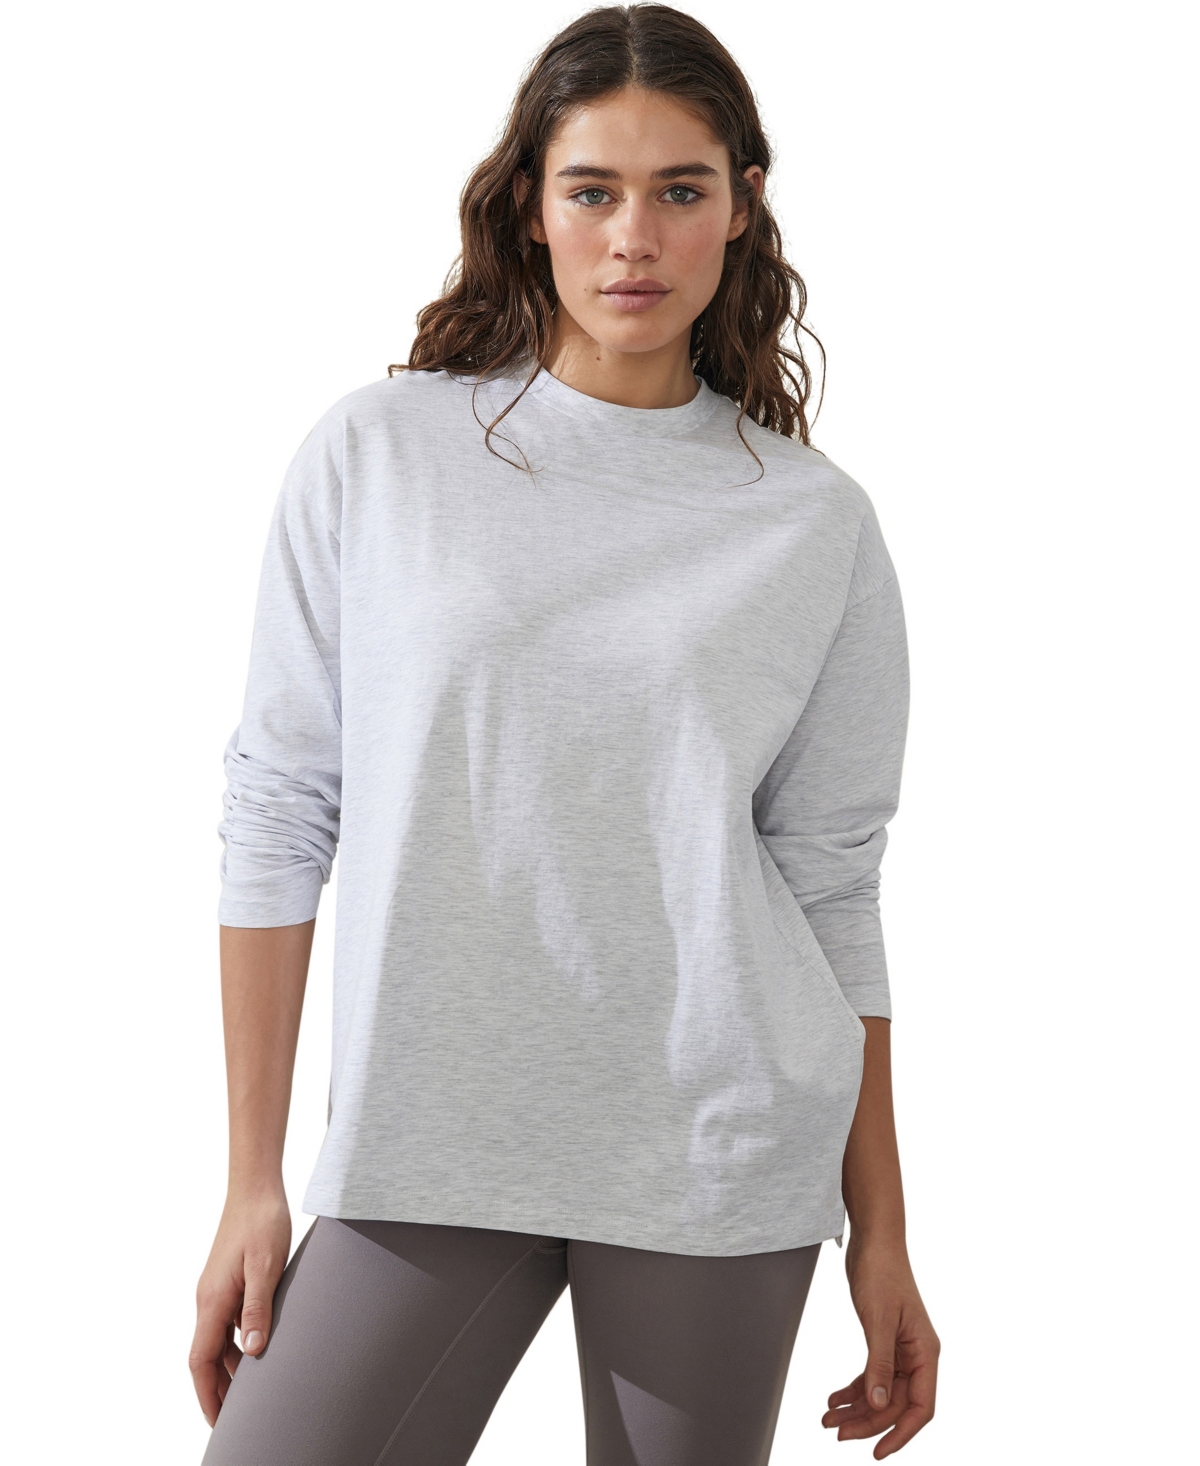 Cotton On Women's Active Essentials Long Sleeve Top In Grey Marle